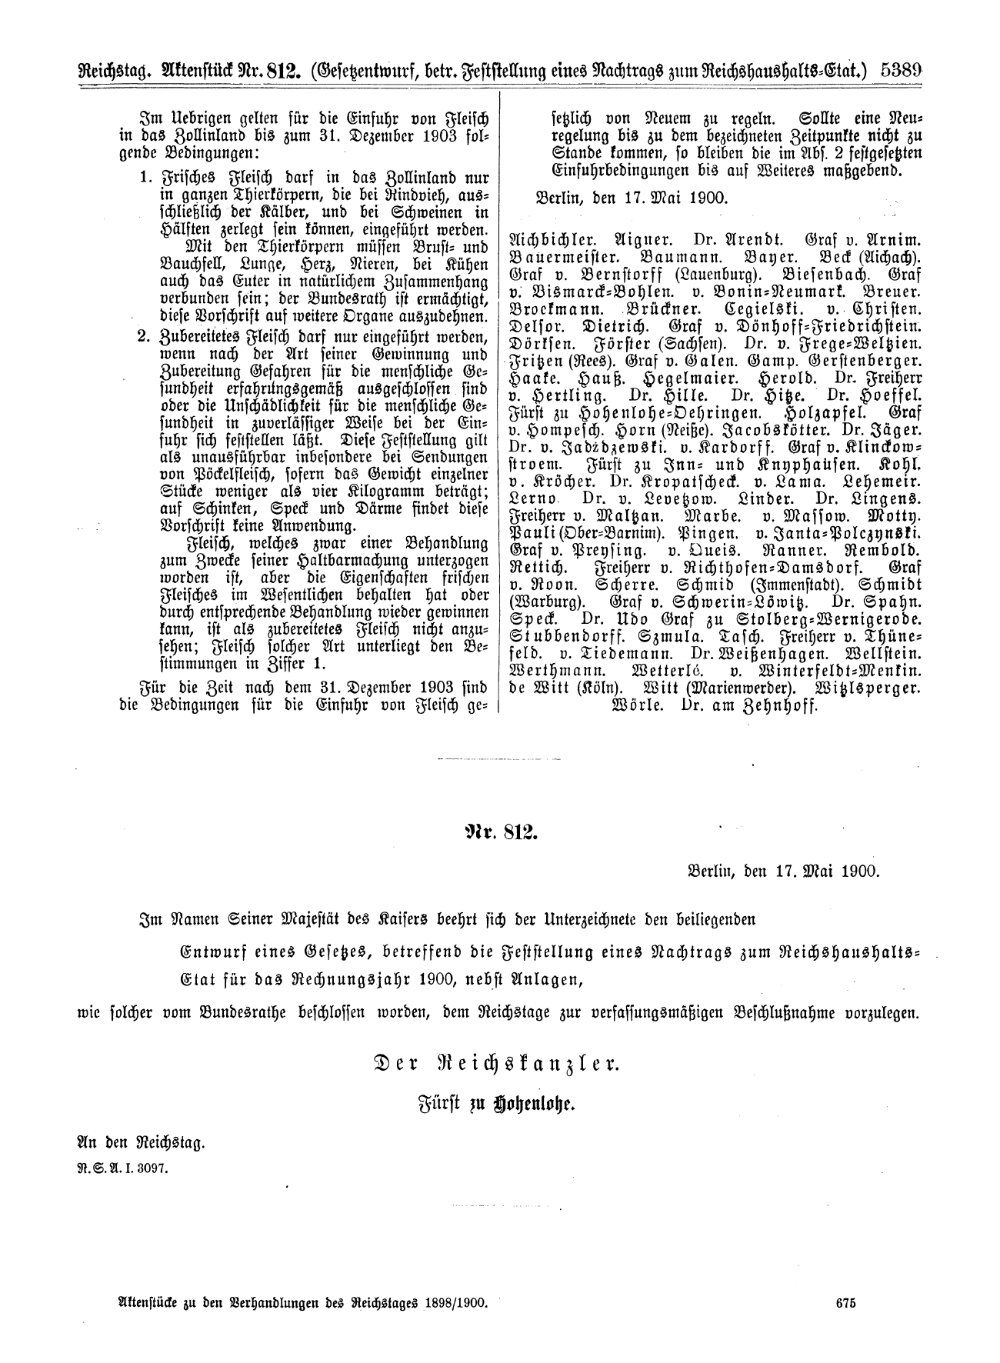 Scan of page 5389